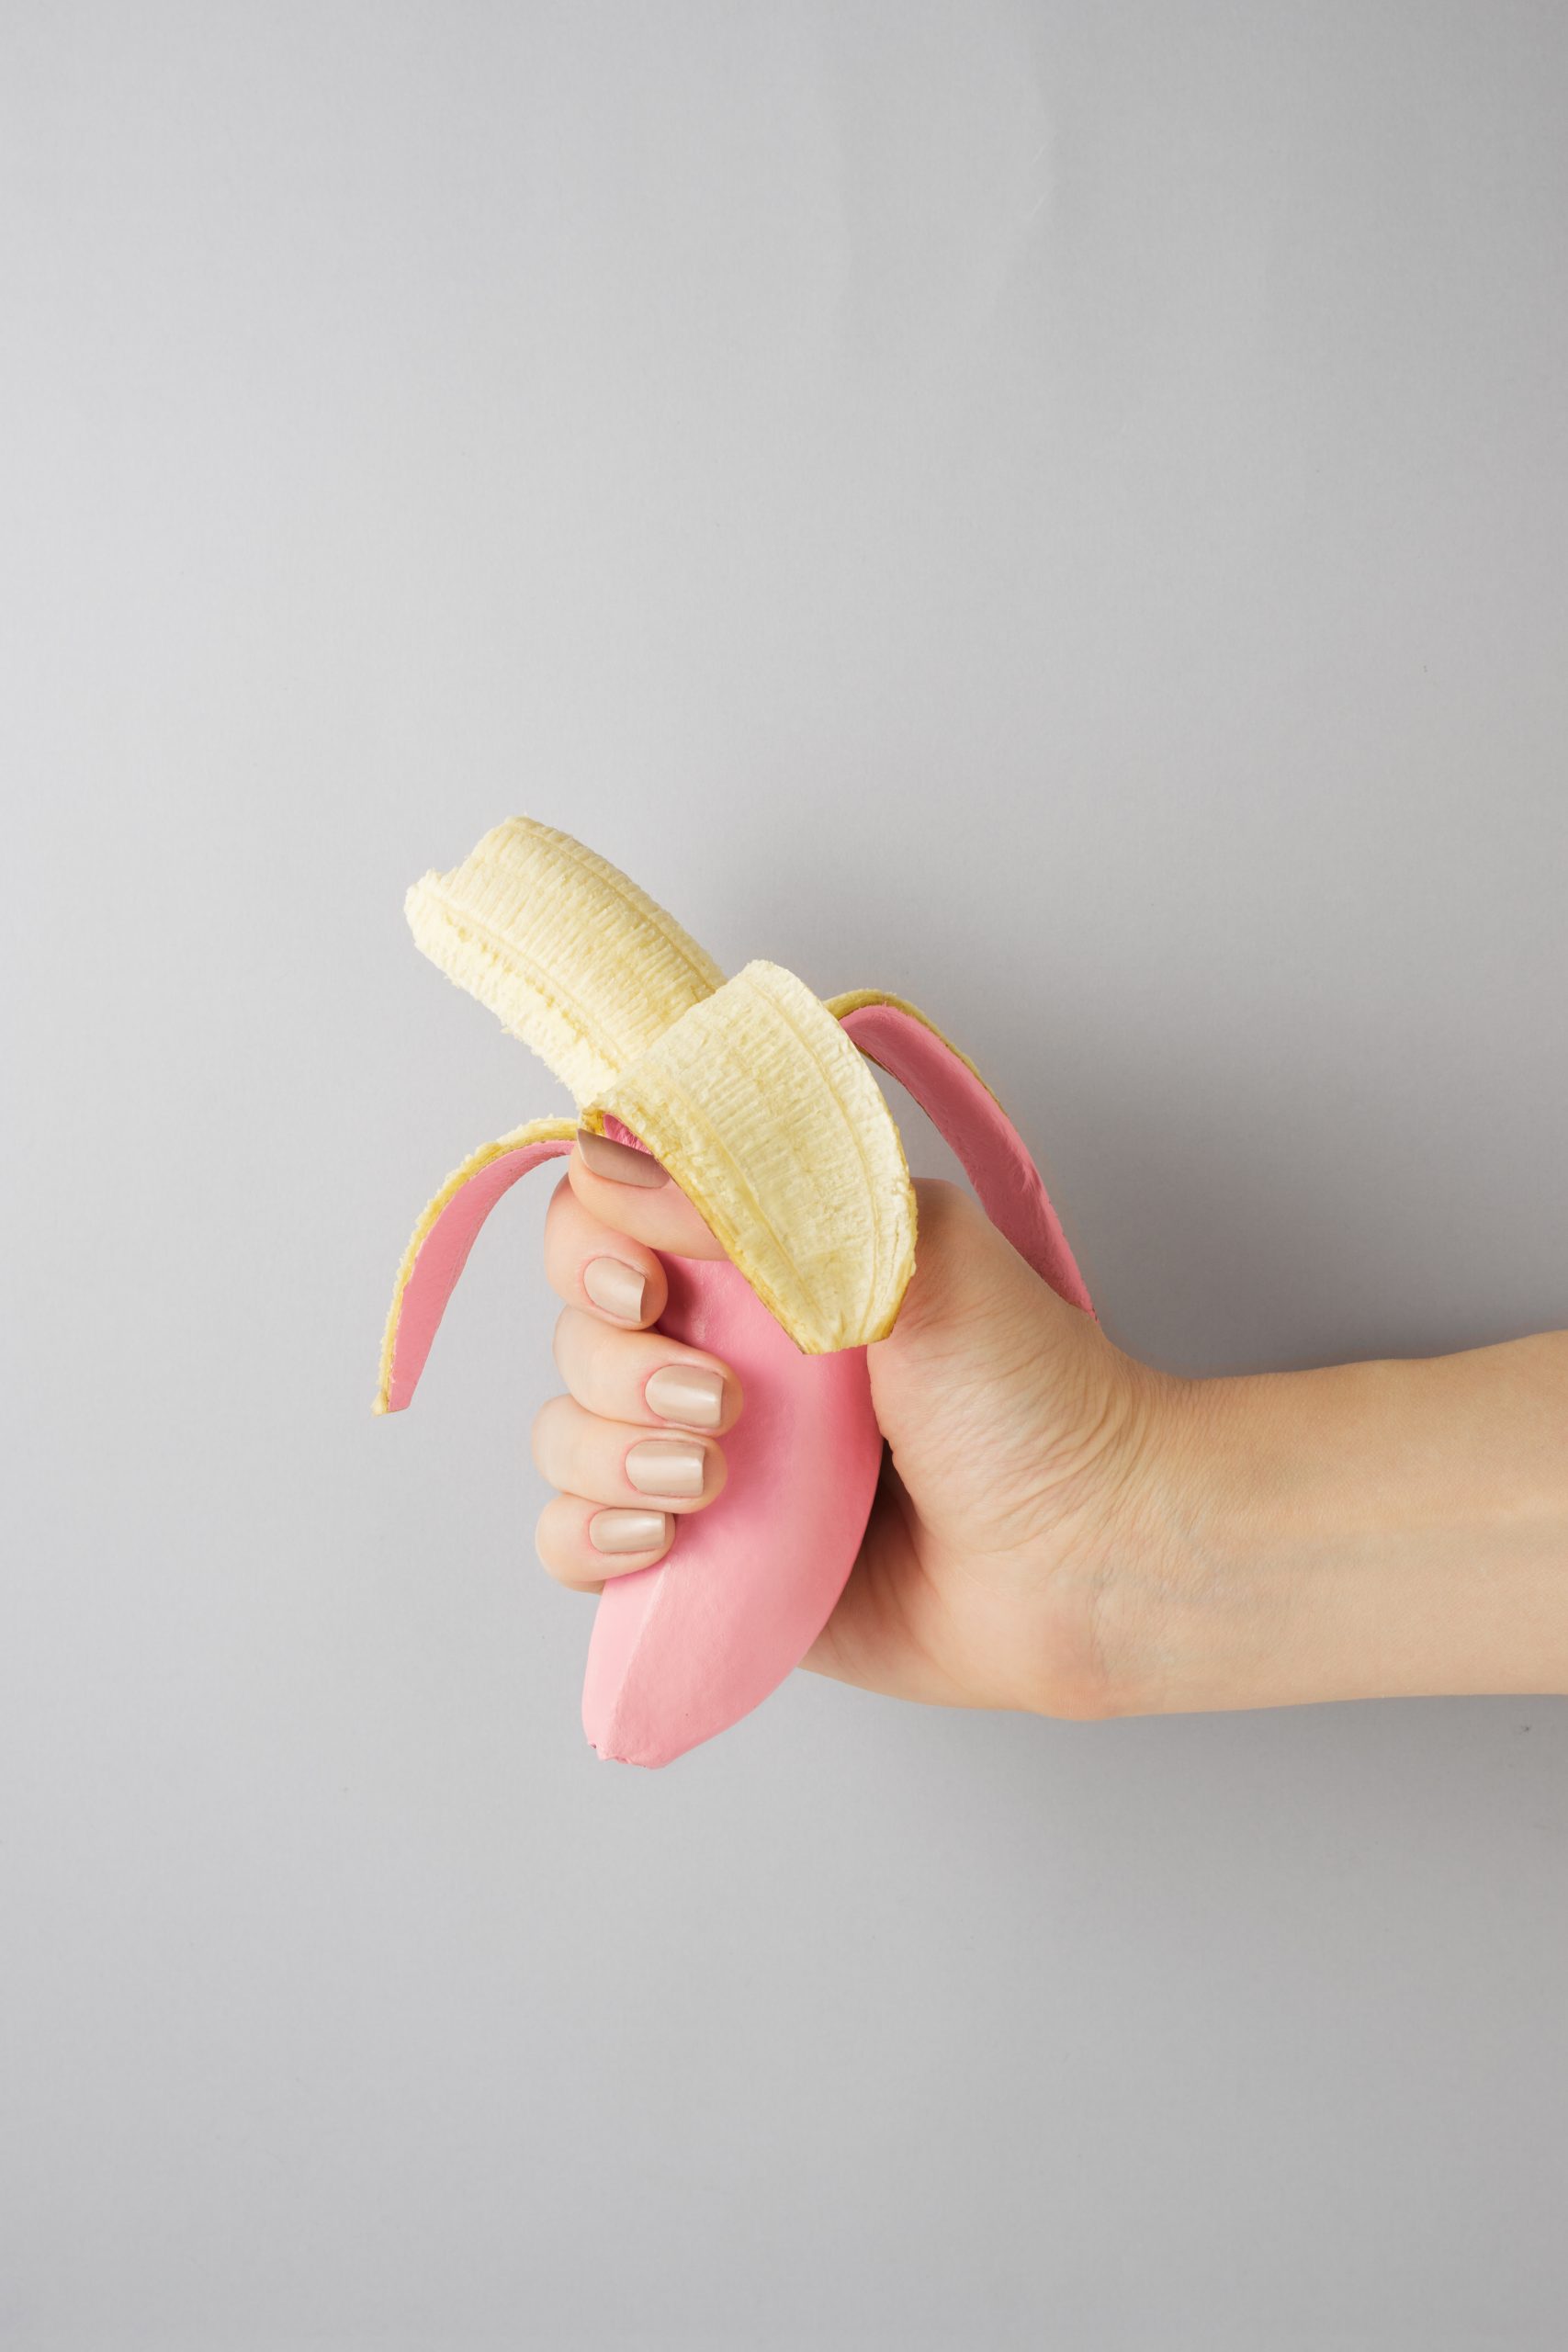 All you need to know about the Japanese banana diet for weight loss